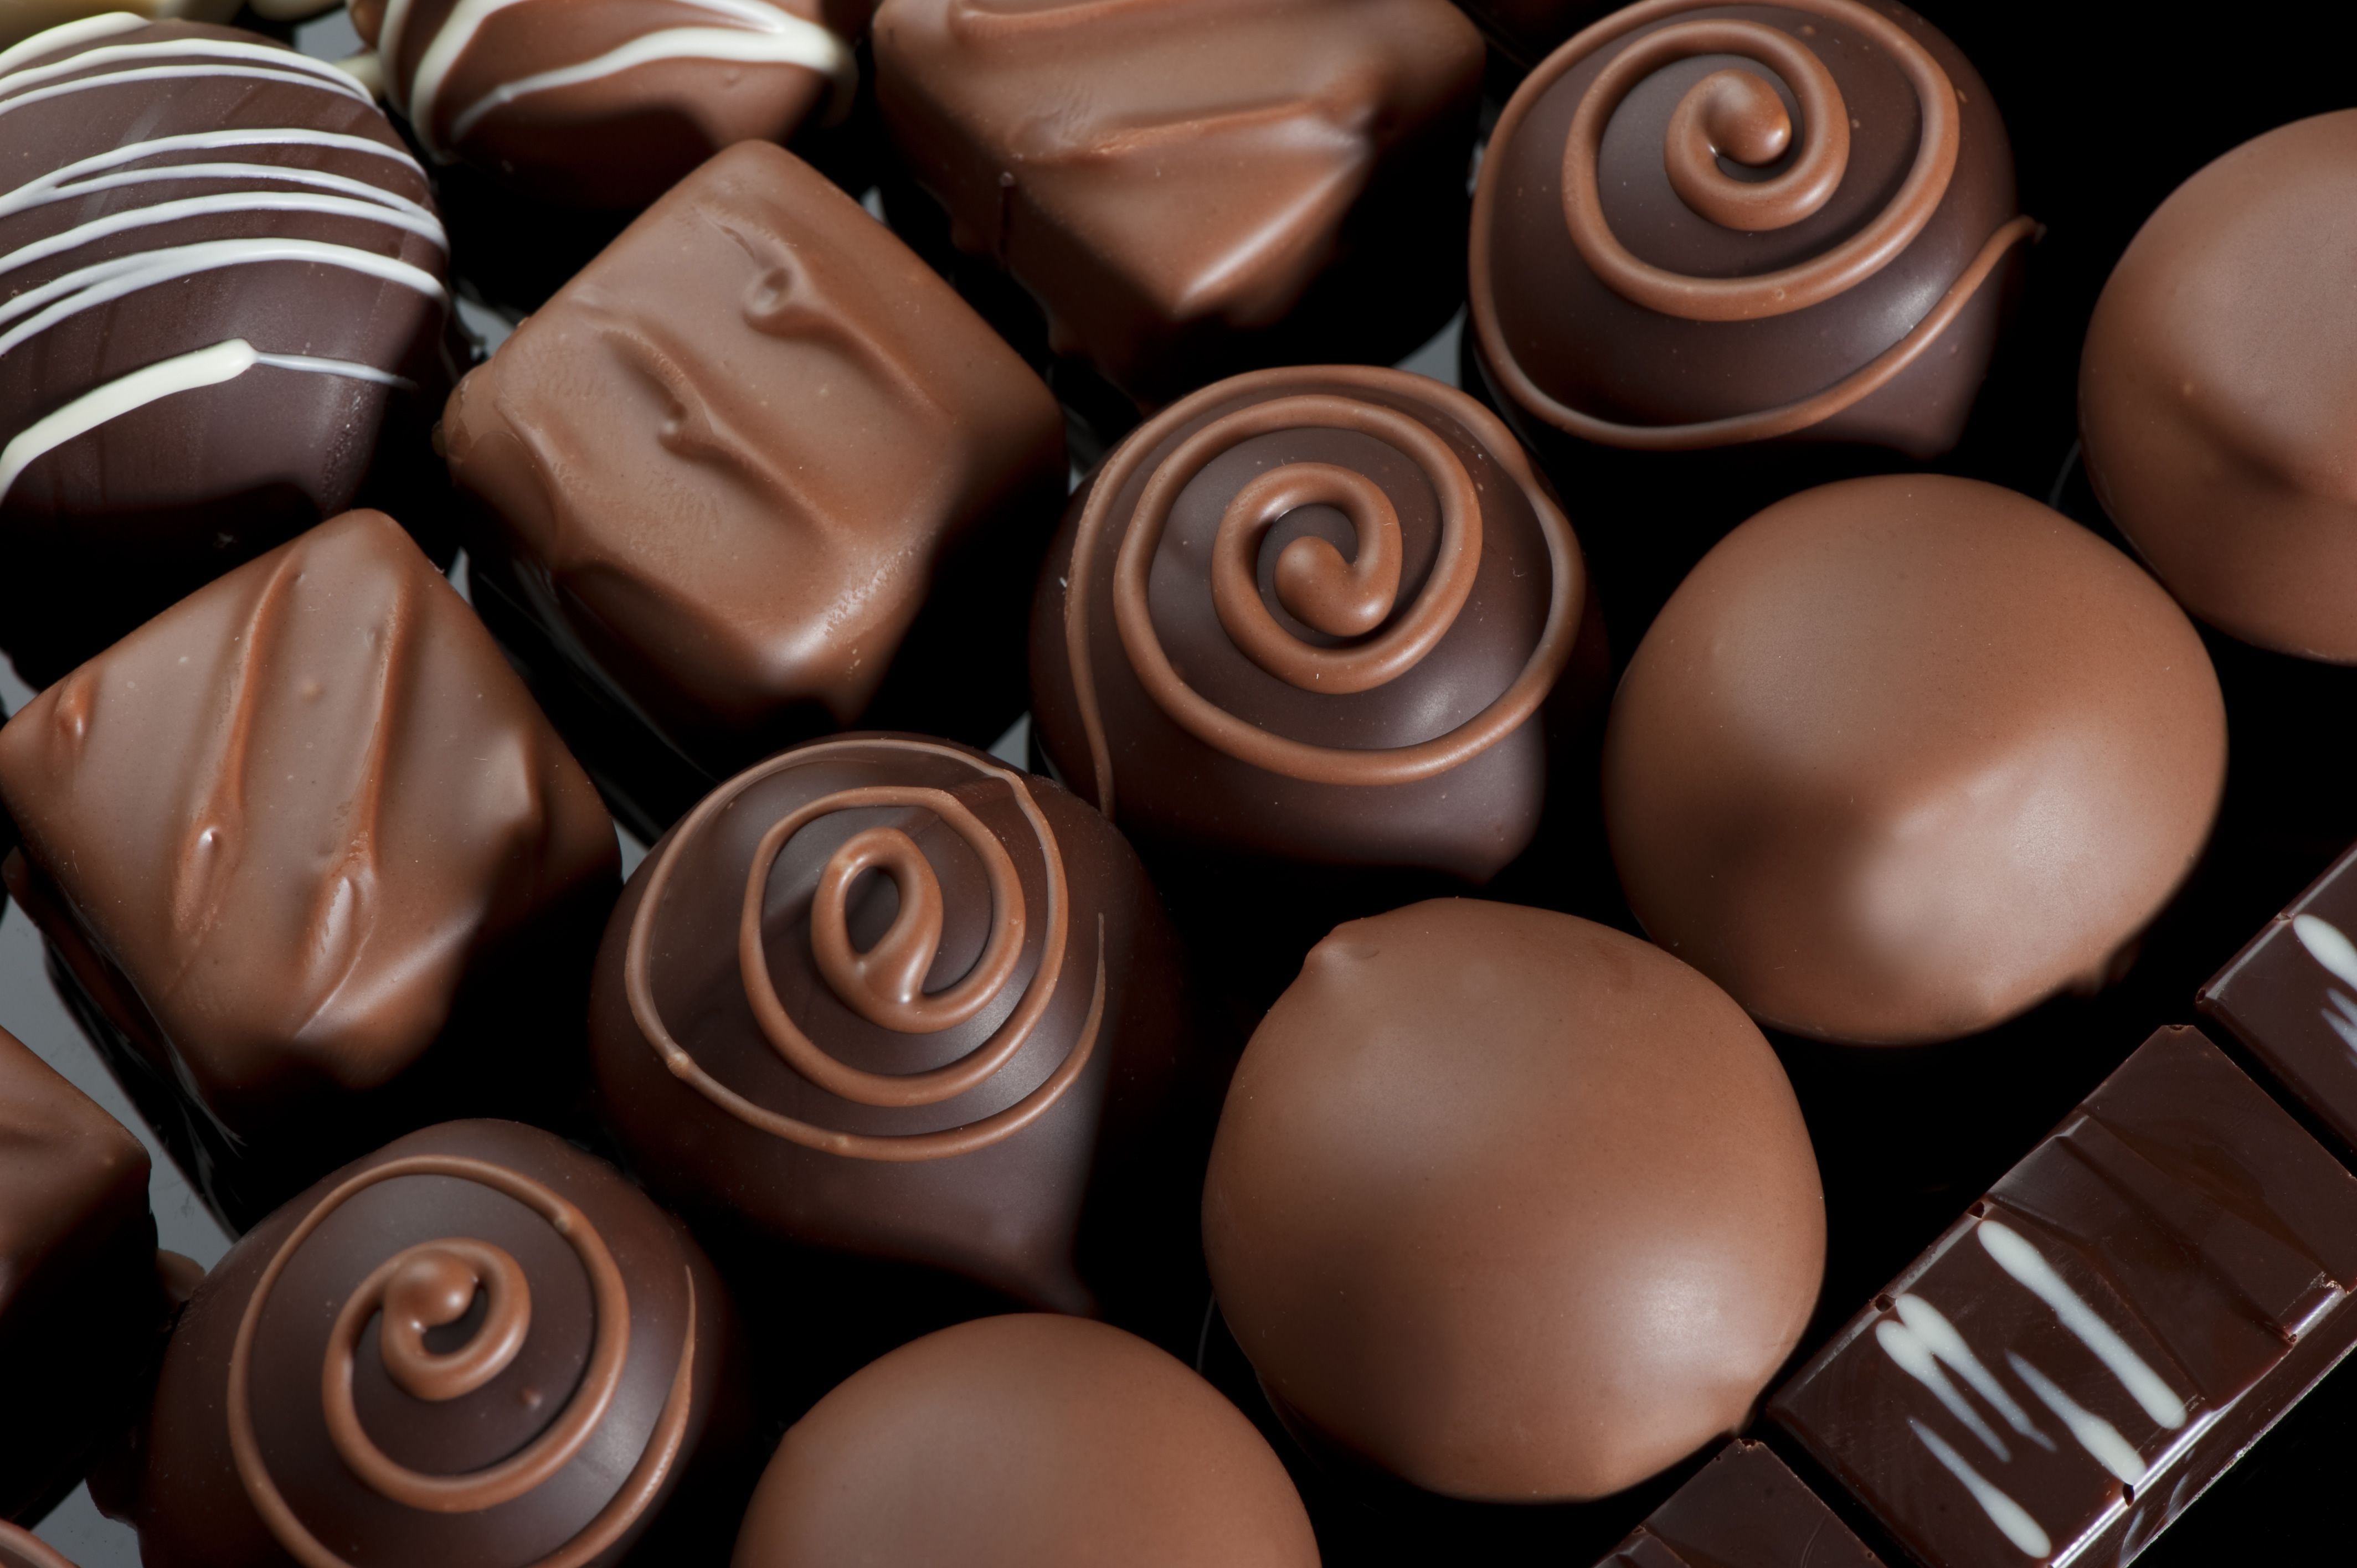 Chocolate, Chocolate candy, download .hwalls.com